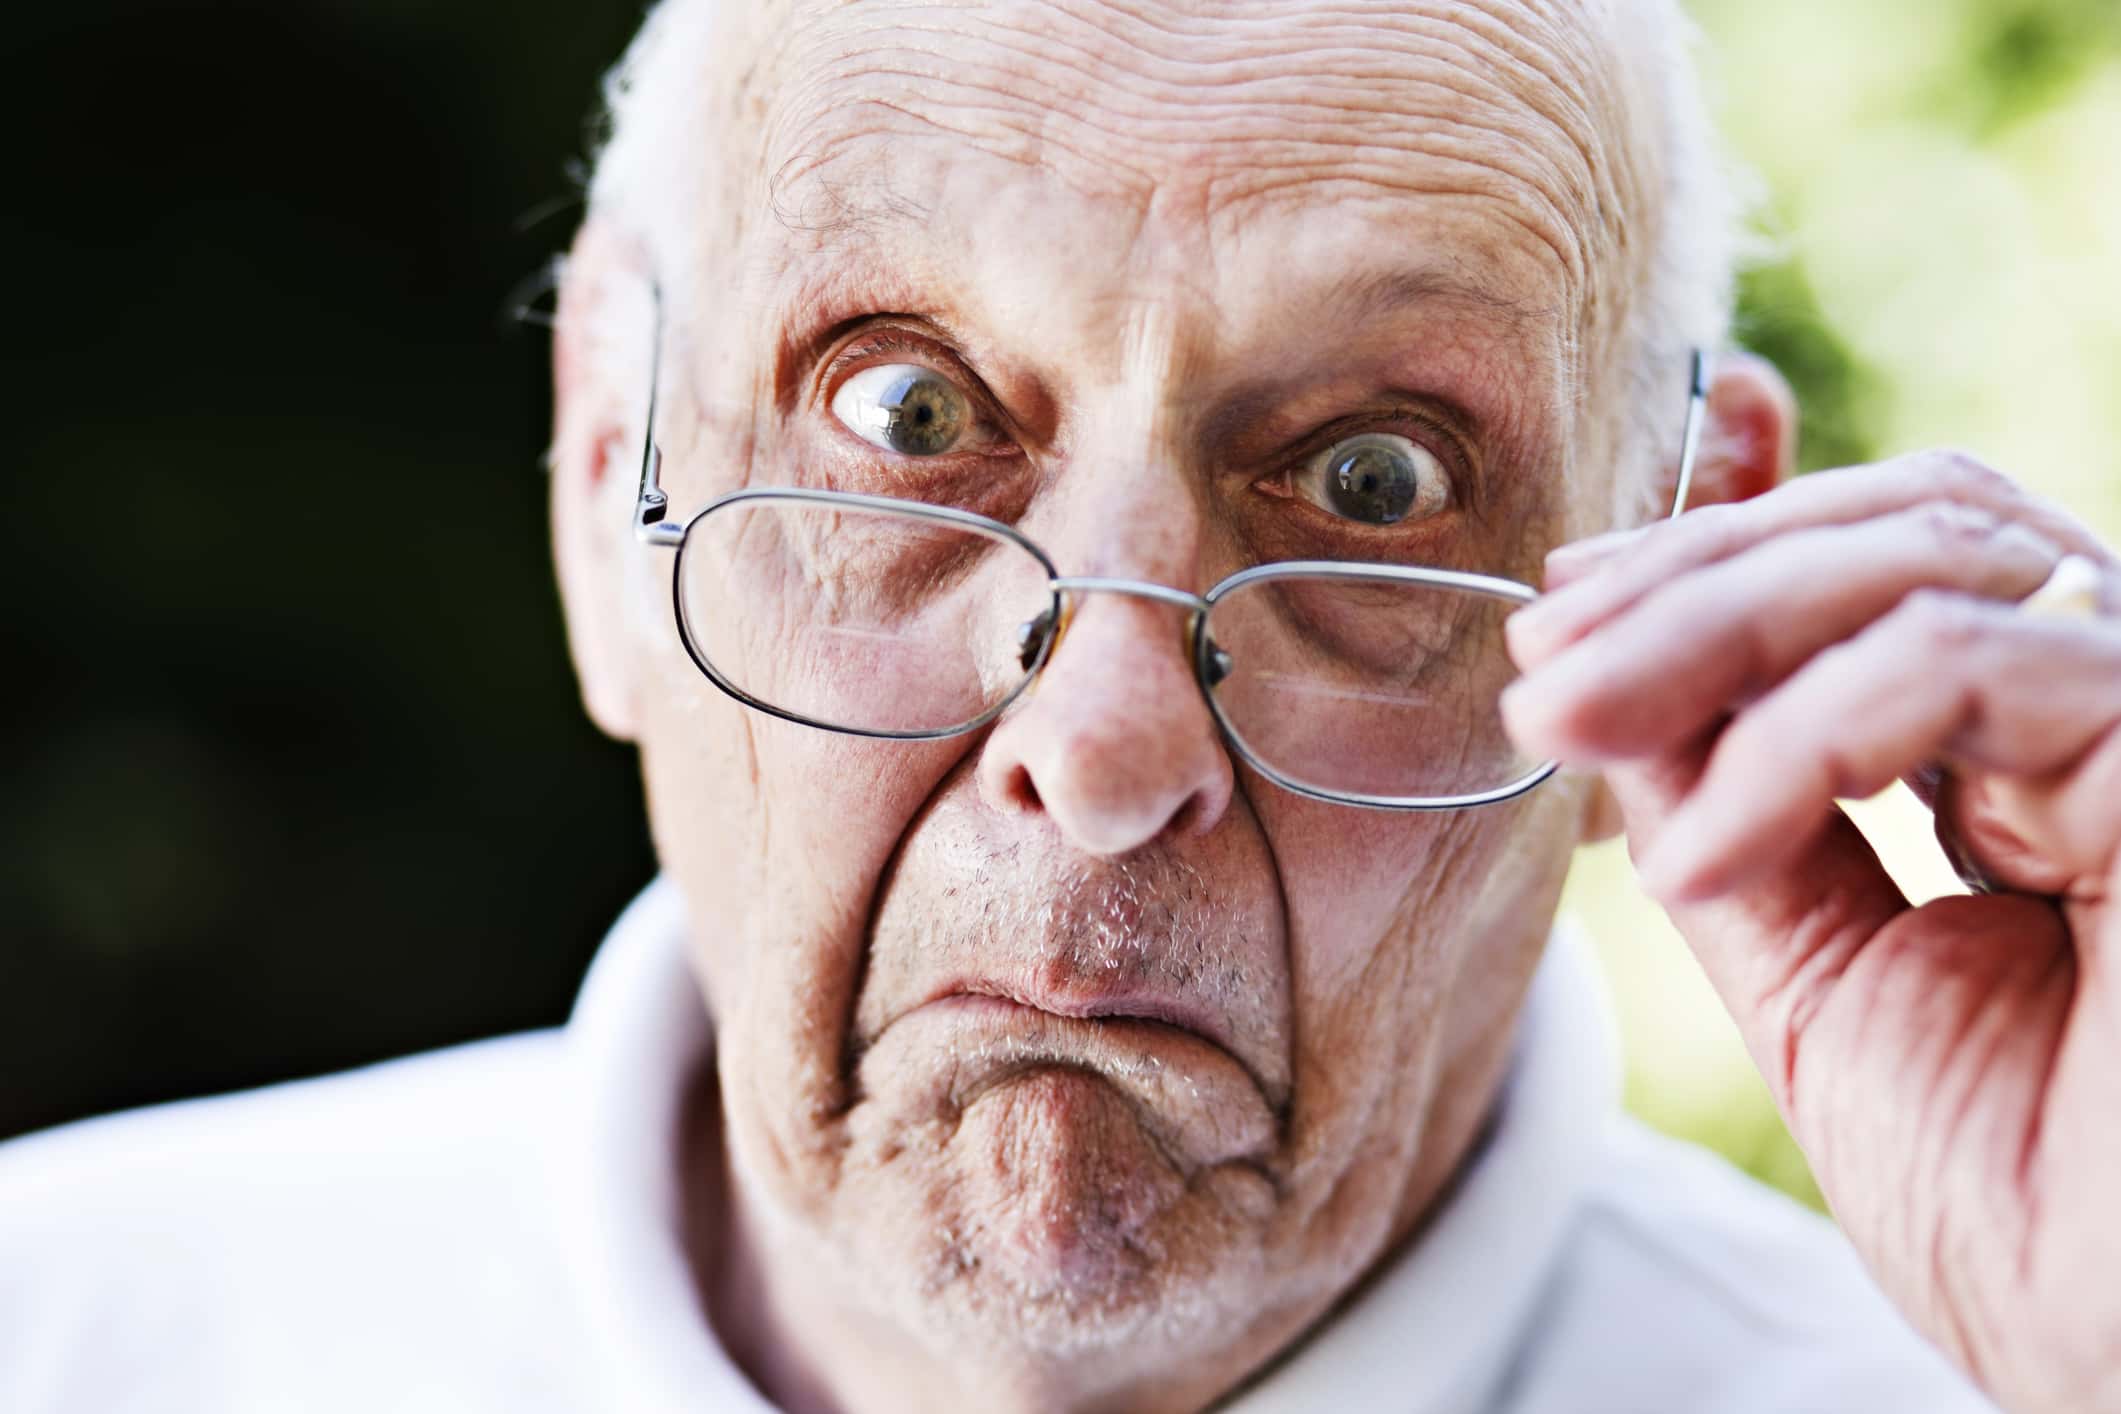 Grumpy old man looks over spectacles, shocked and disapproving.